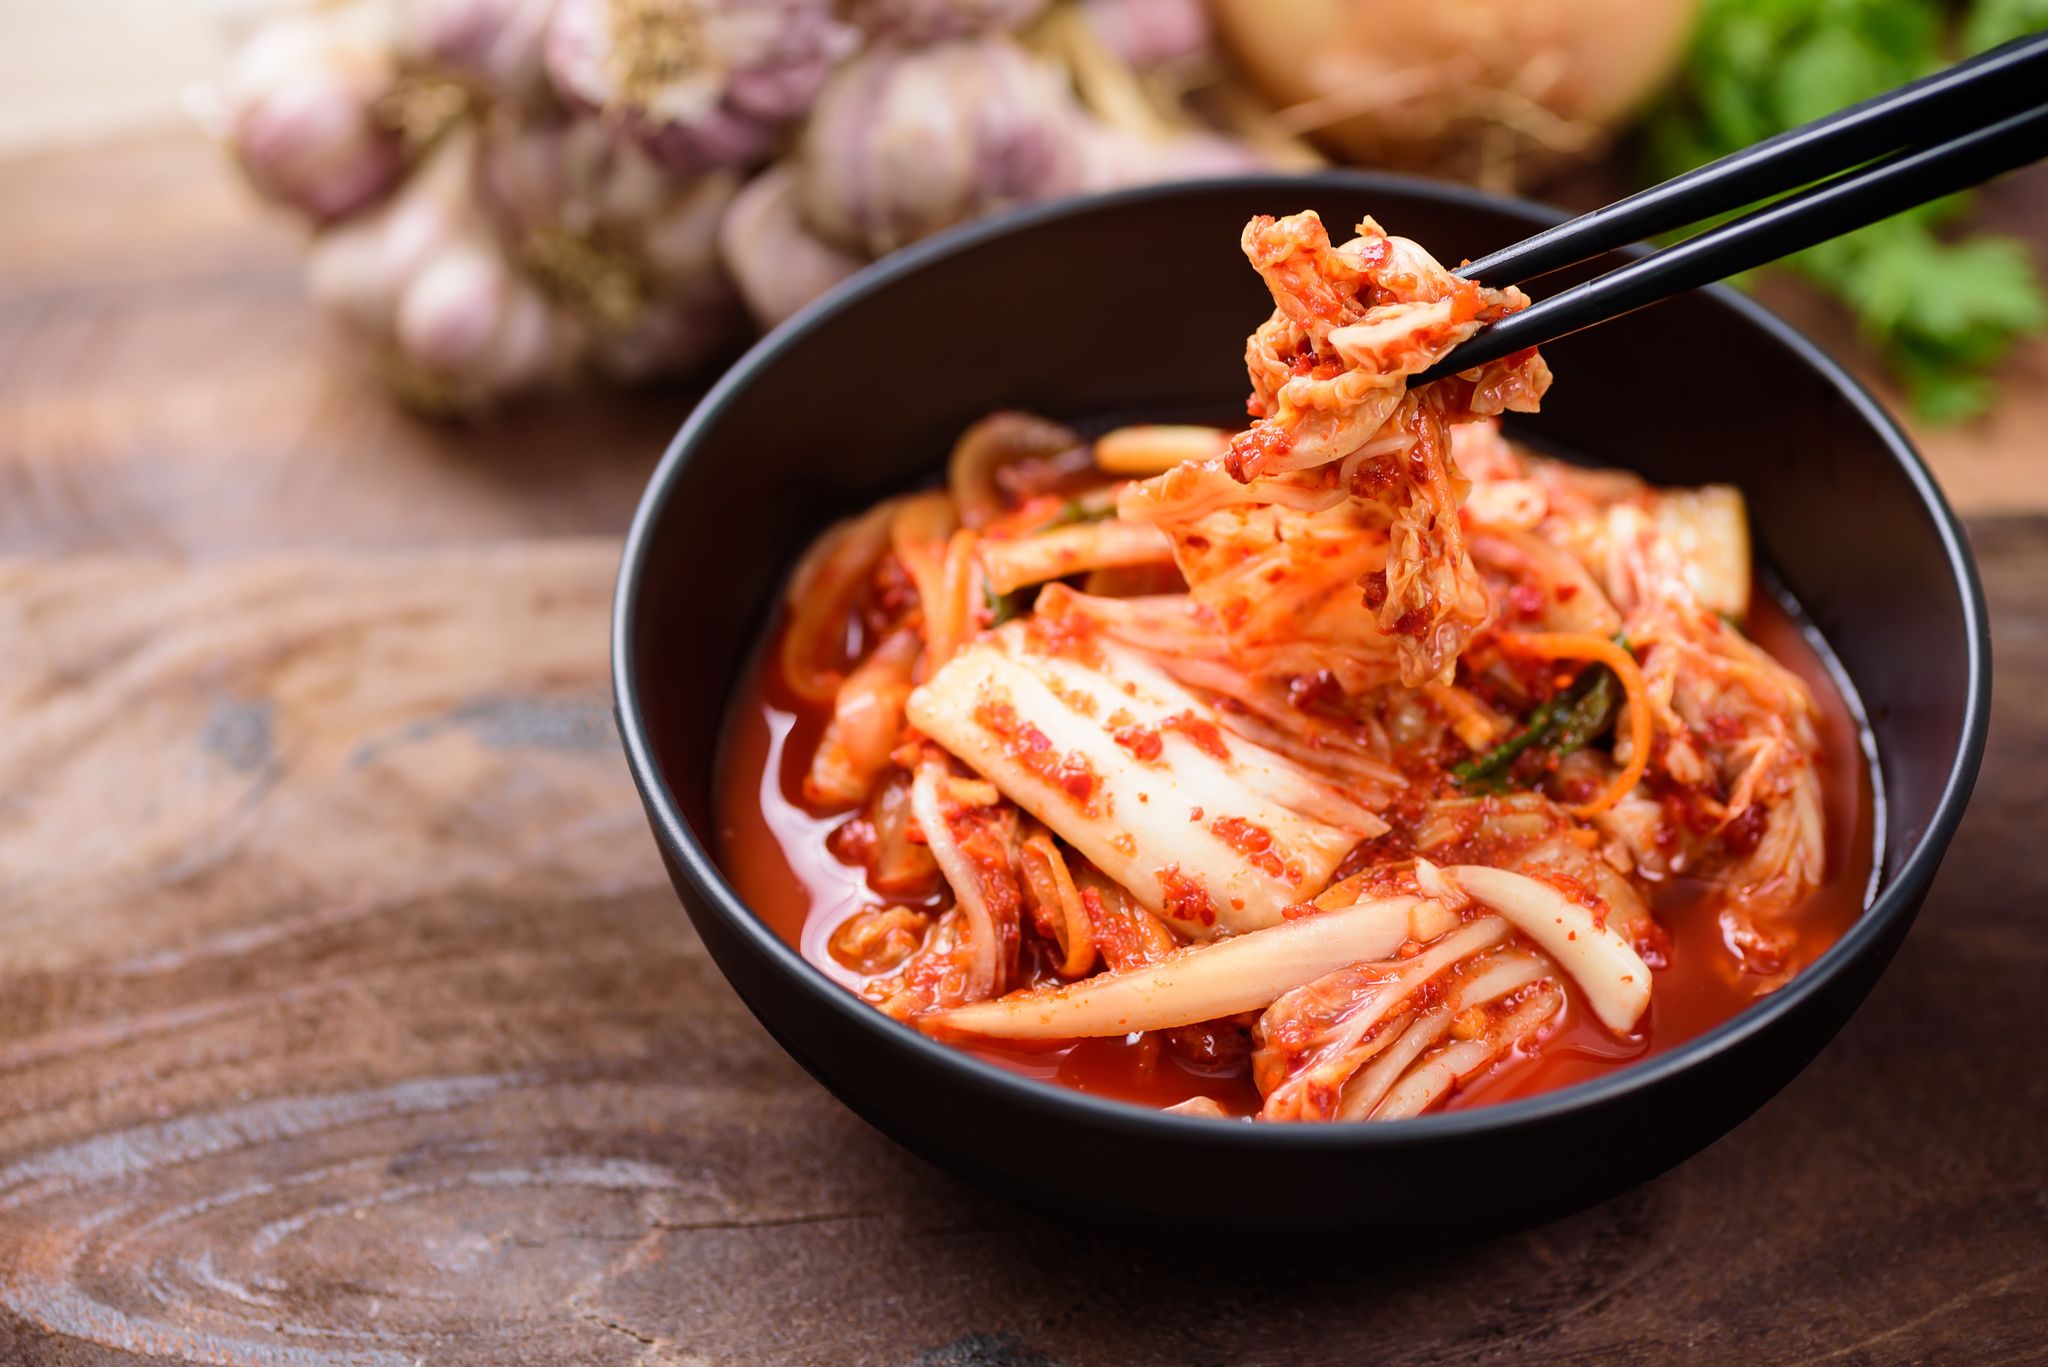 Almost every Korean dish involves ‘Kimchi’. What is this?